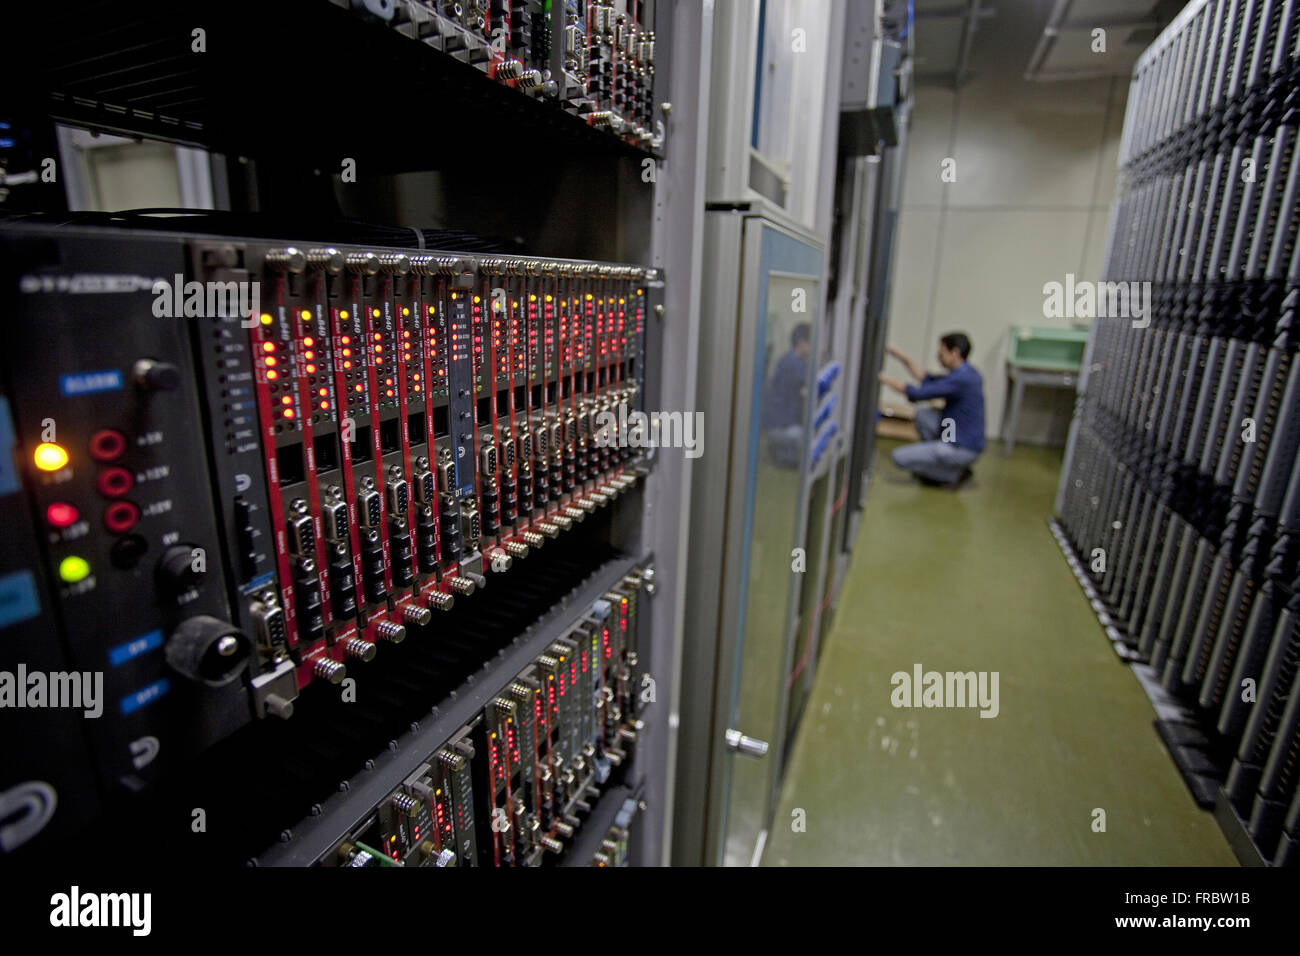 Worker in central servers and processors in telecommunications carrier Stock Photo